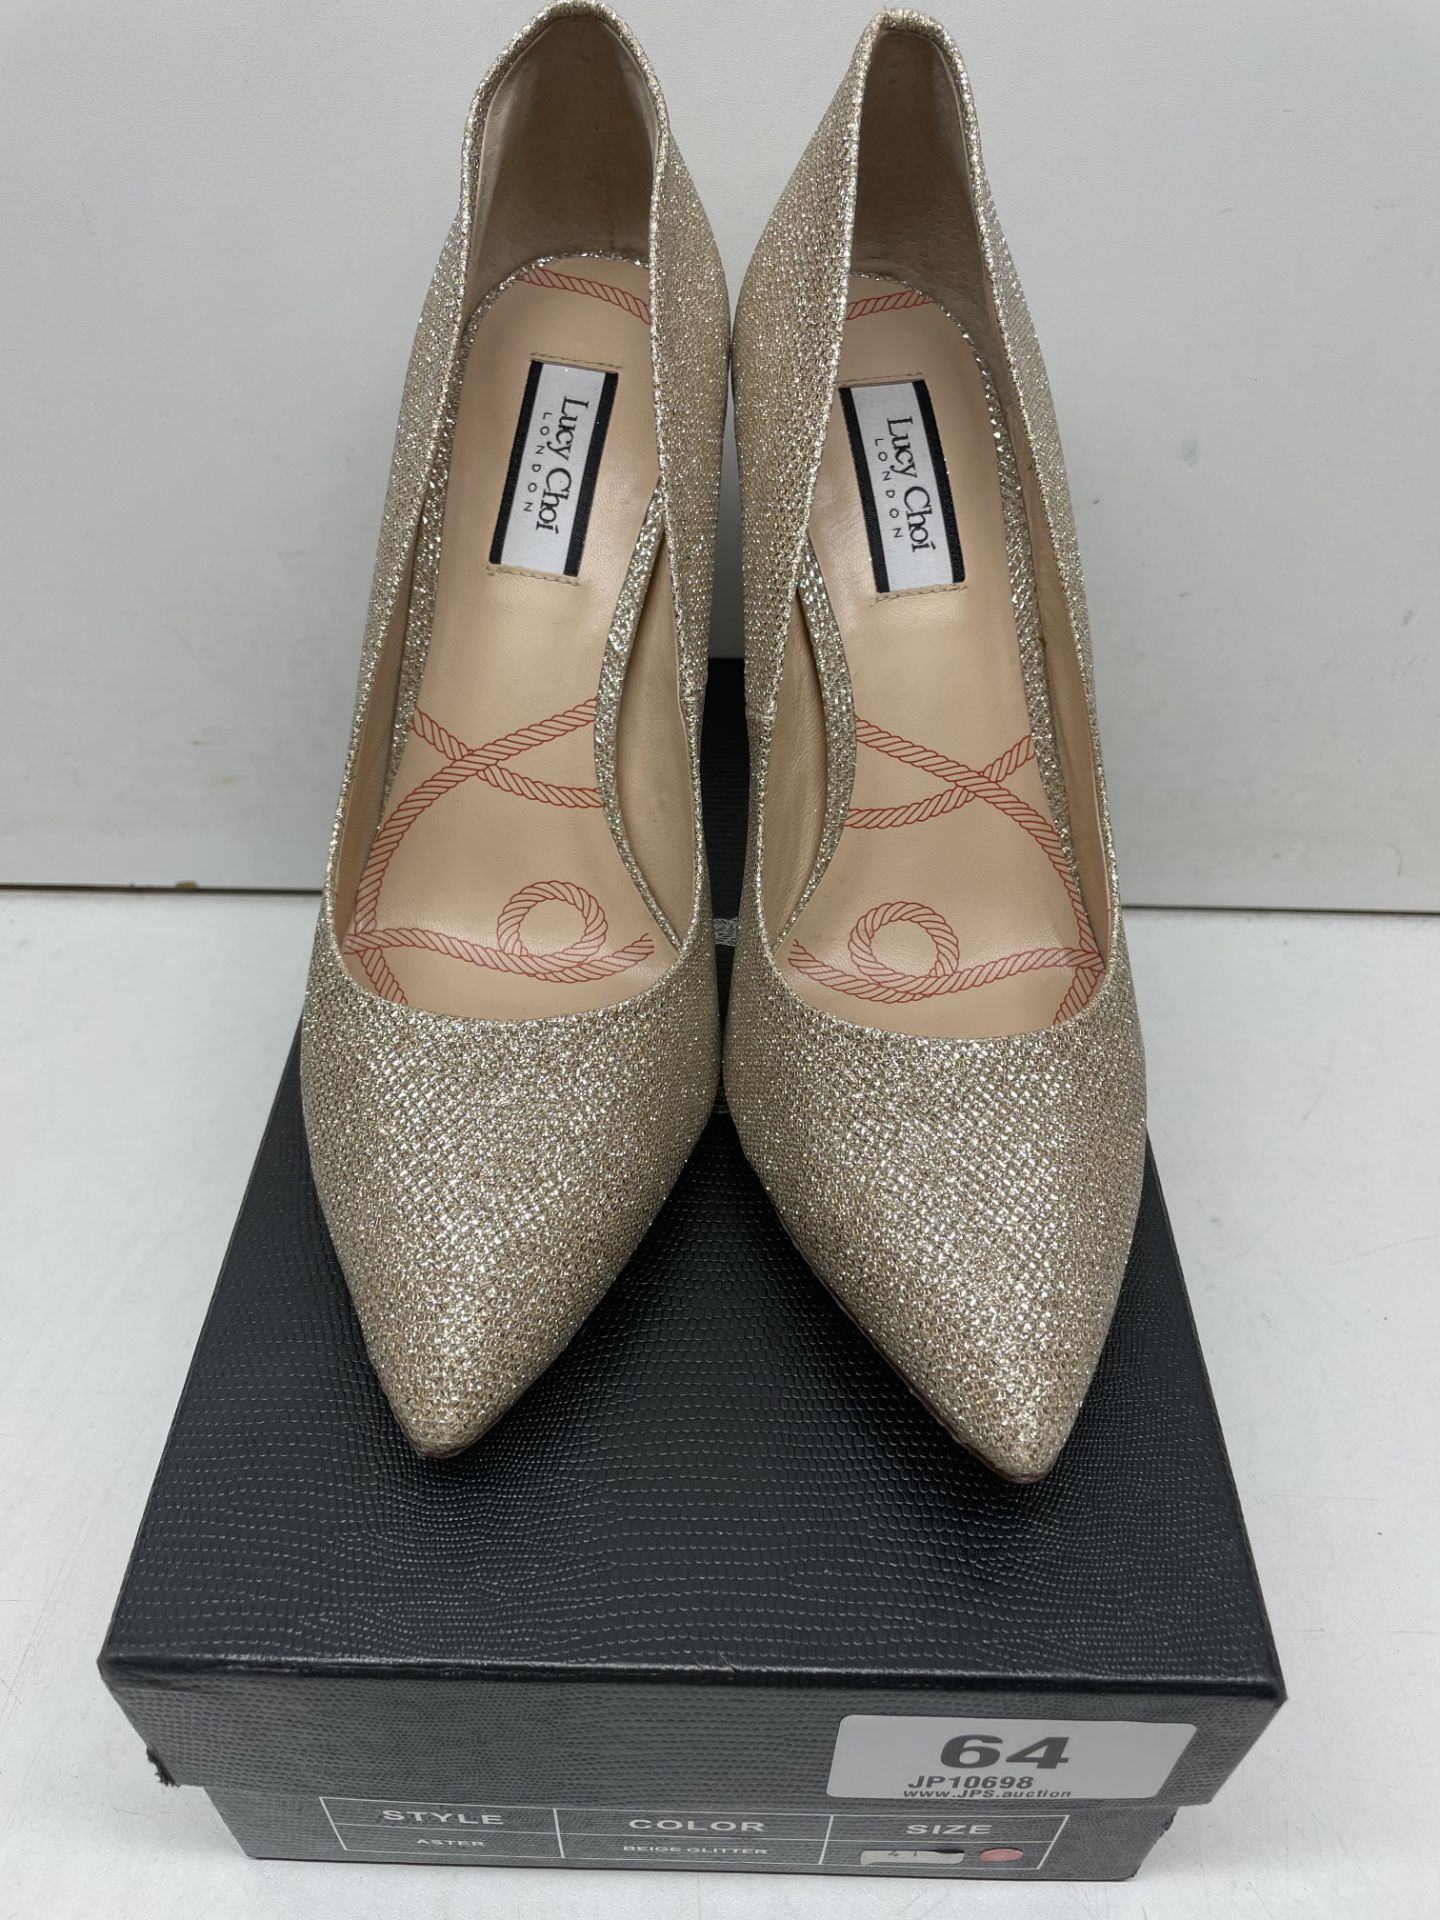 Ex-Display Lucy Choi High Heel Court Shoes | Eur 41 - Image 3 of 5